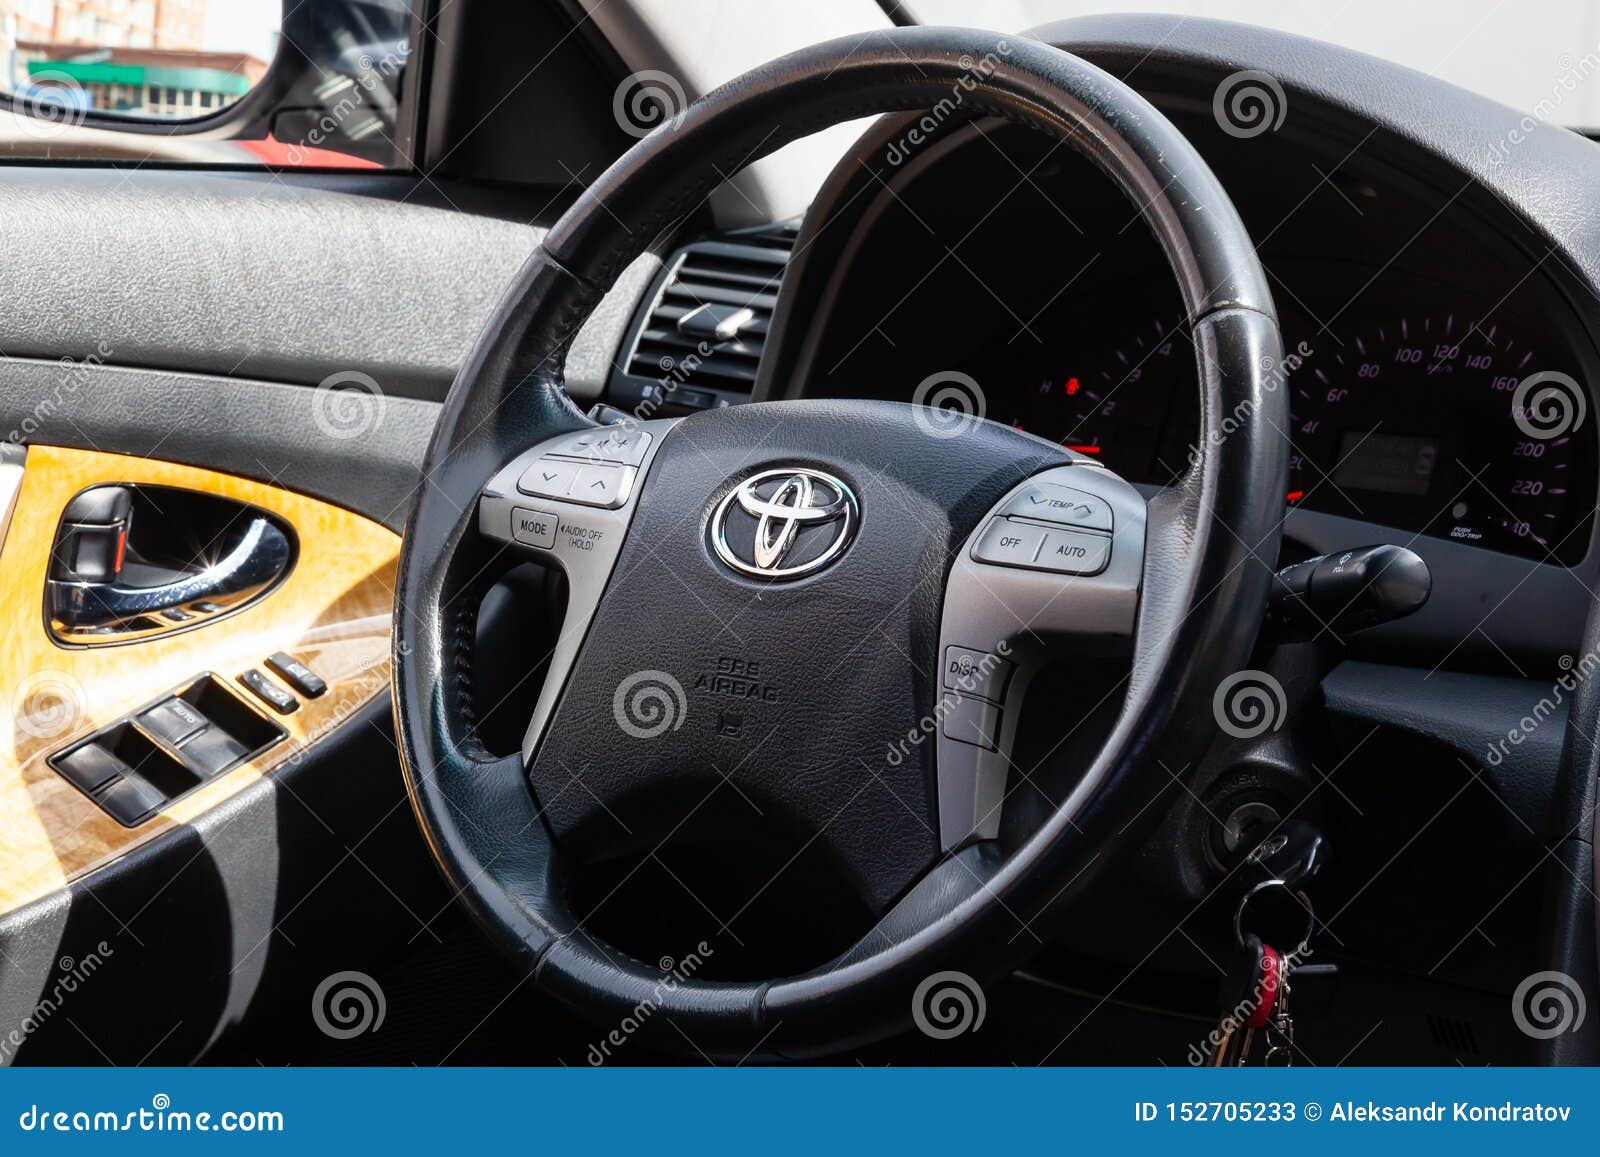 View To The Interior Of Toyota Camry 2006 With Dashboard